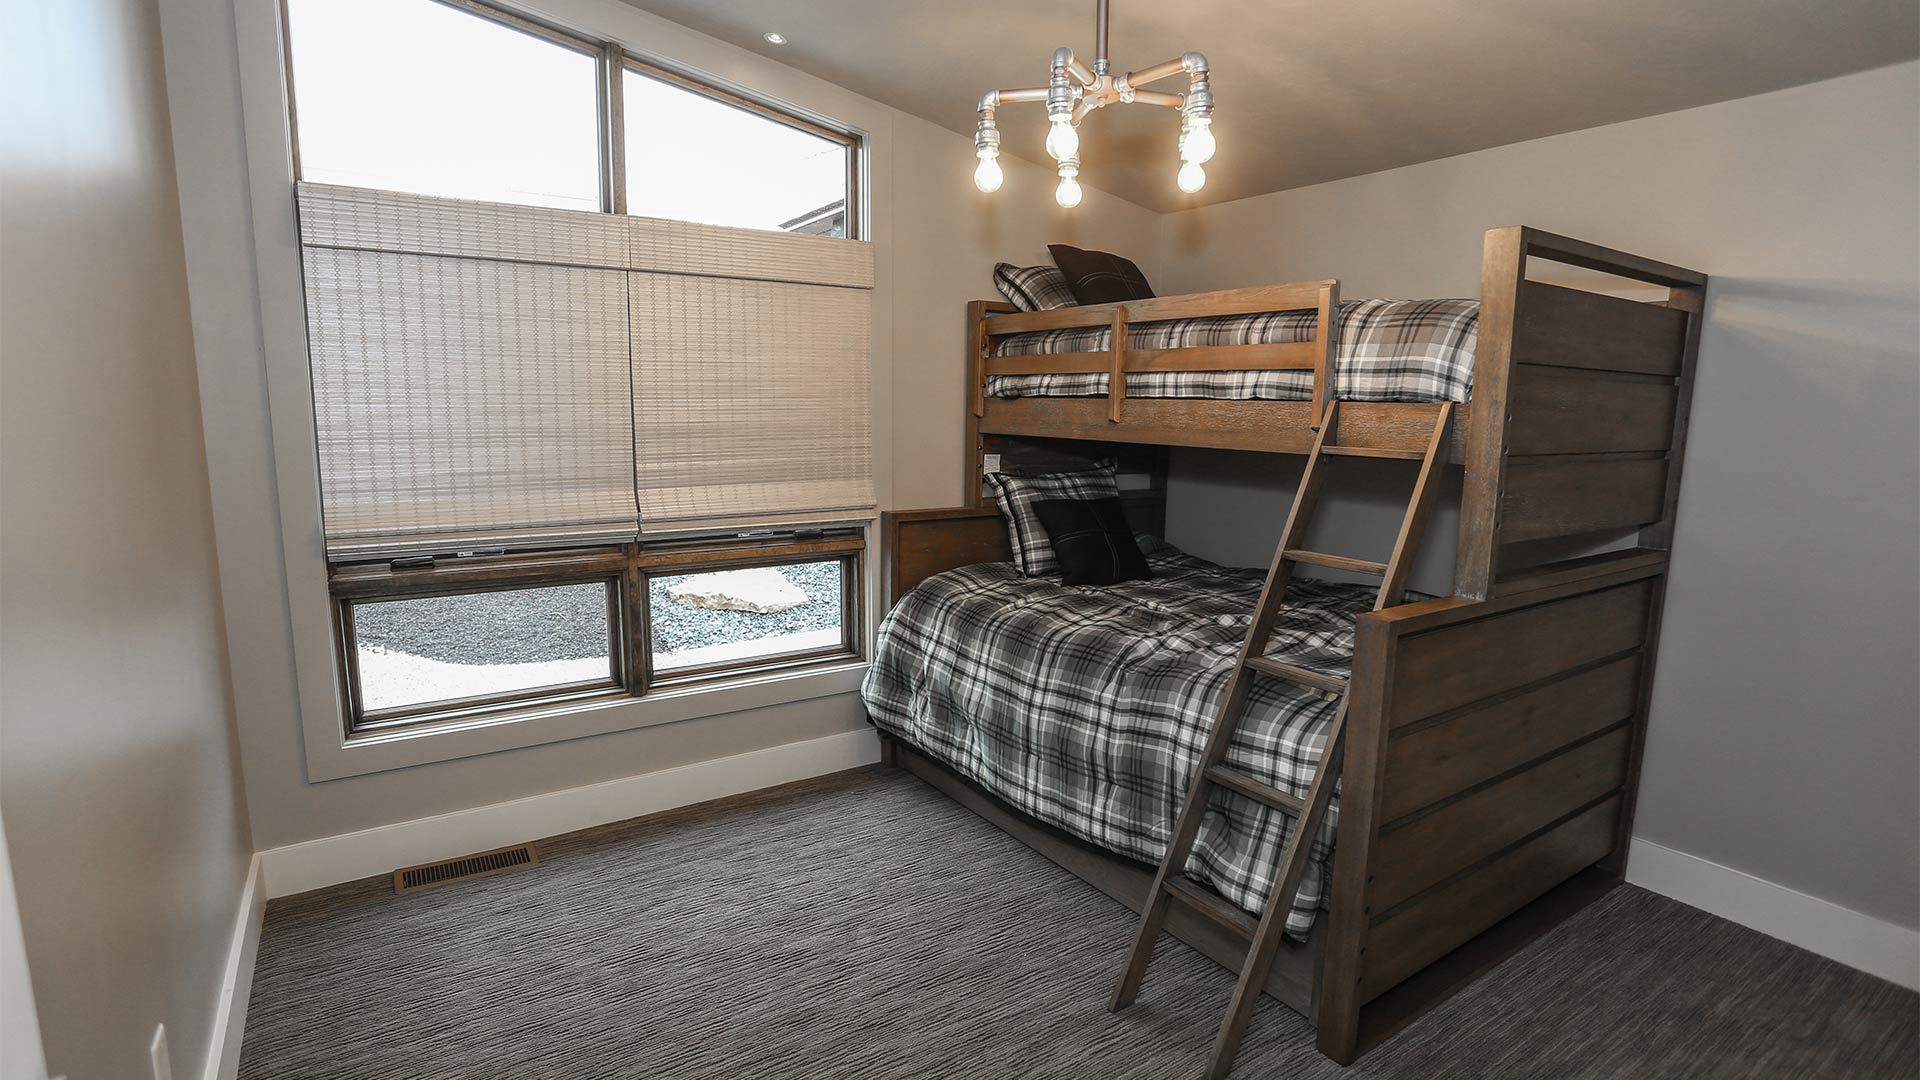 interior shot of a bedroom with bunkbeds. The bunkbeds have grey plaid bedding. There are large windows giving views of the nature outside